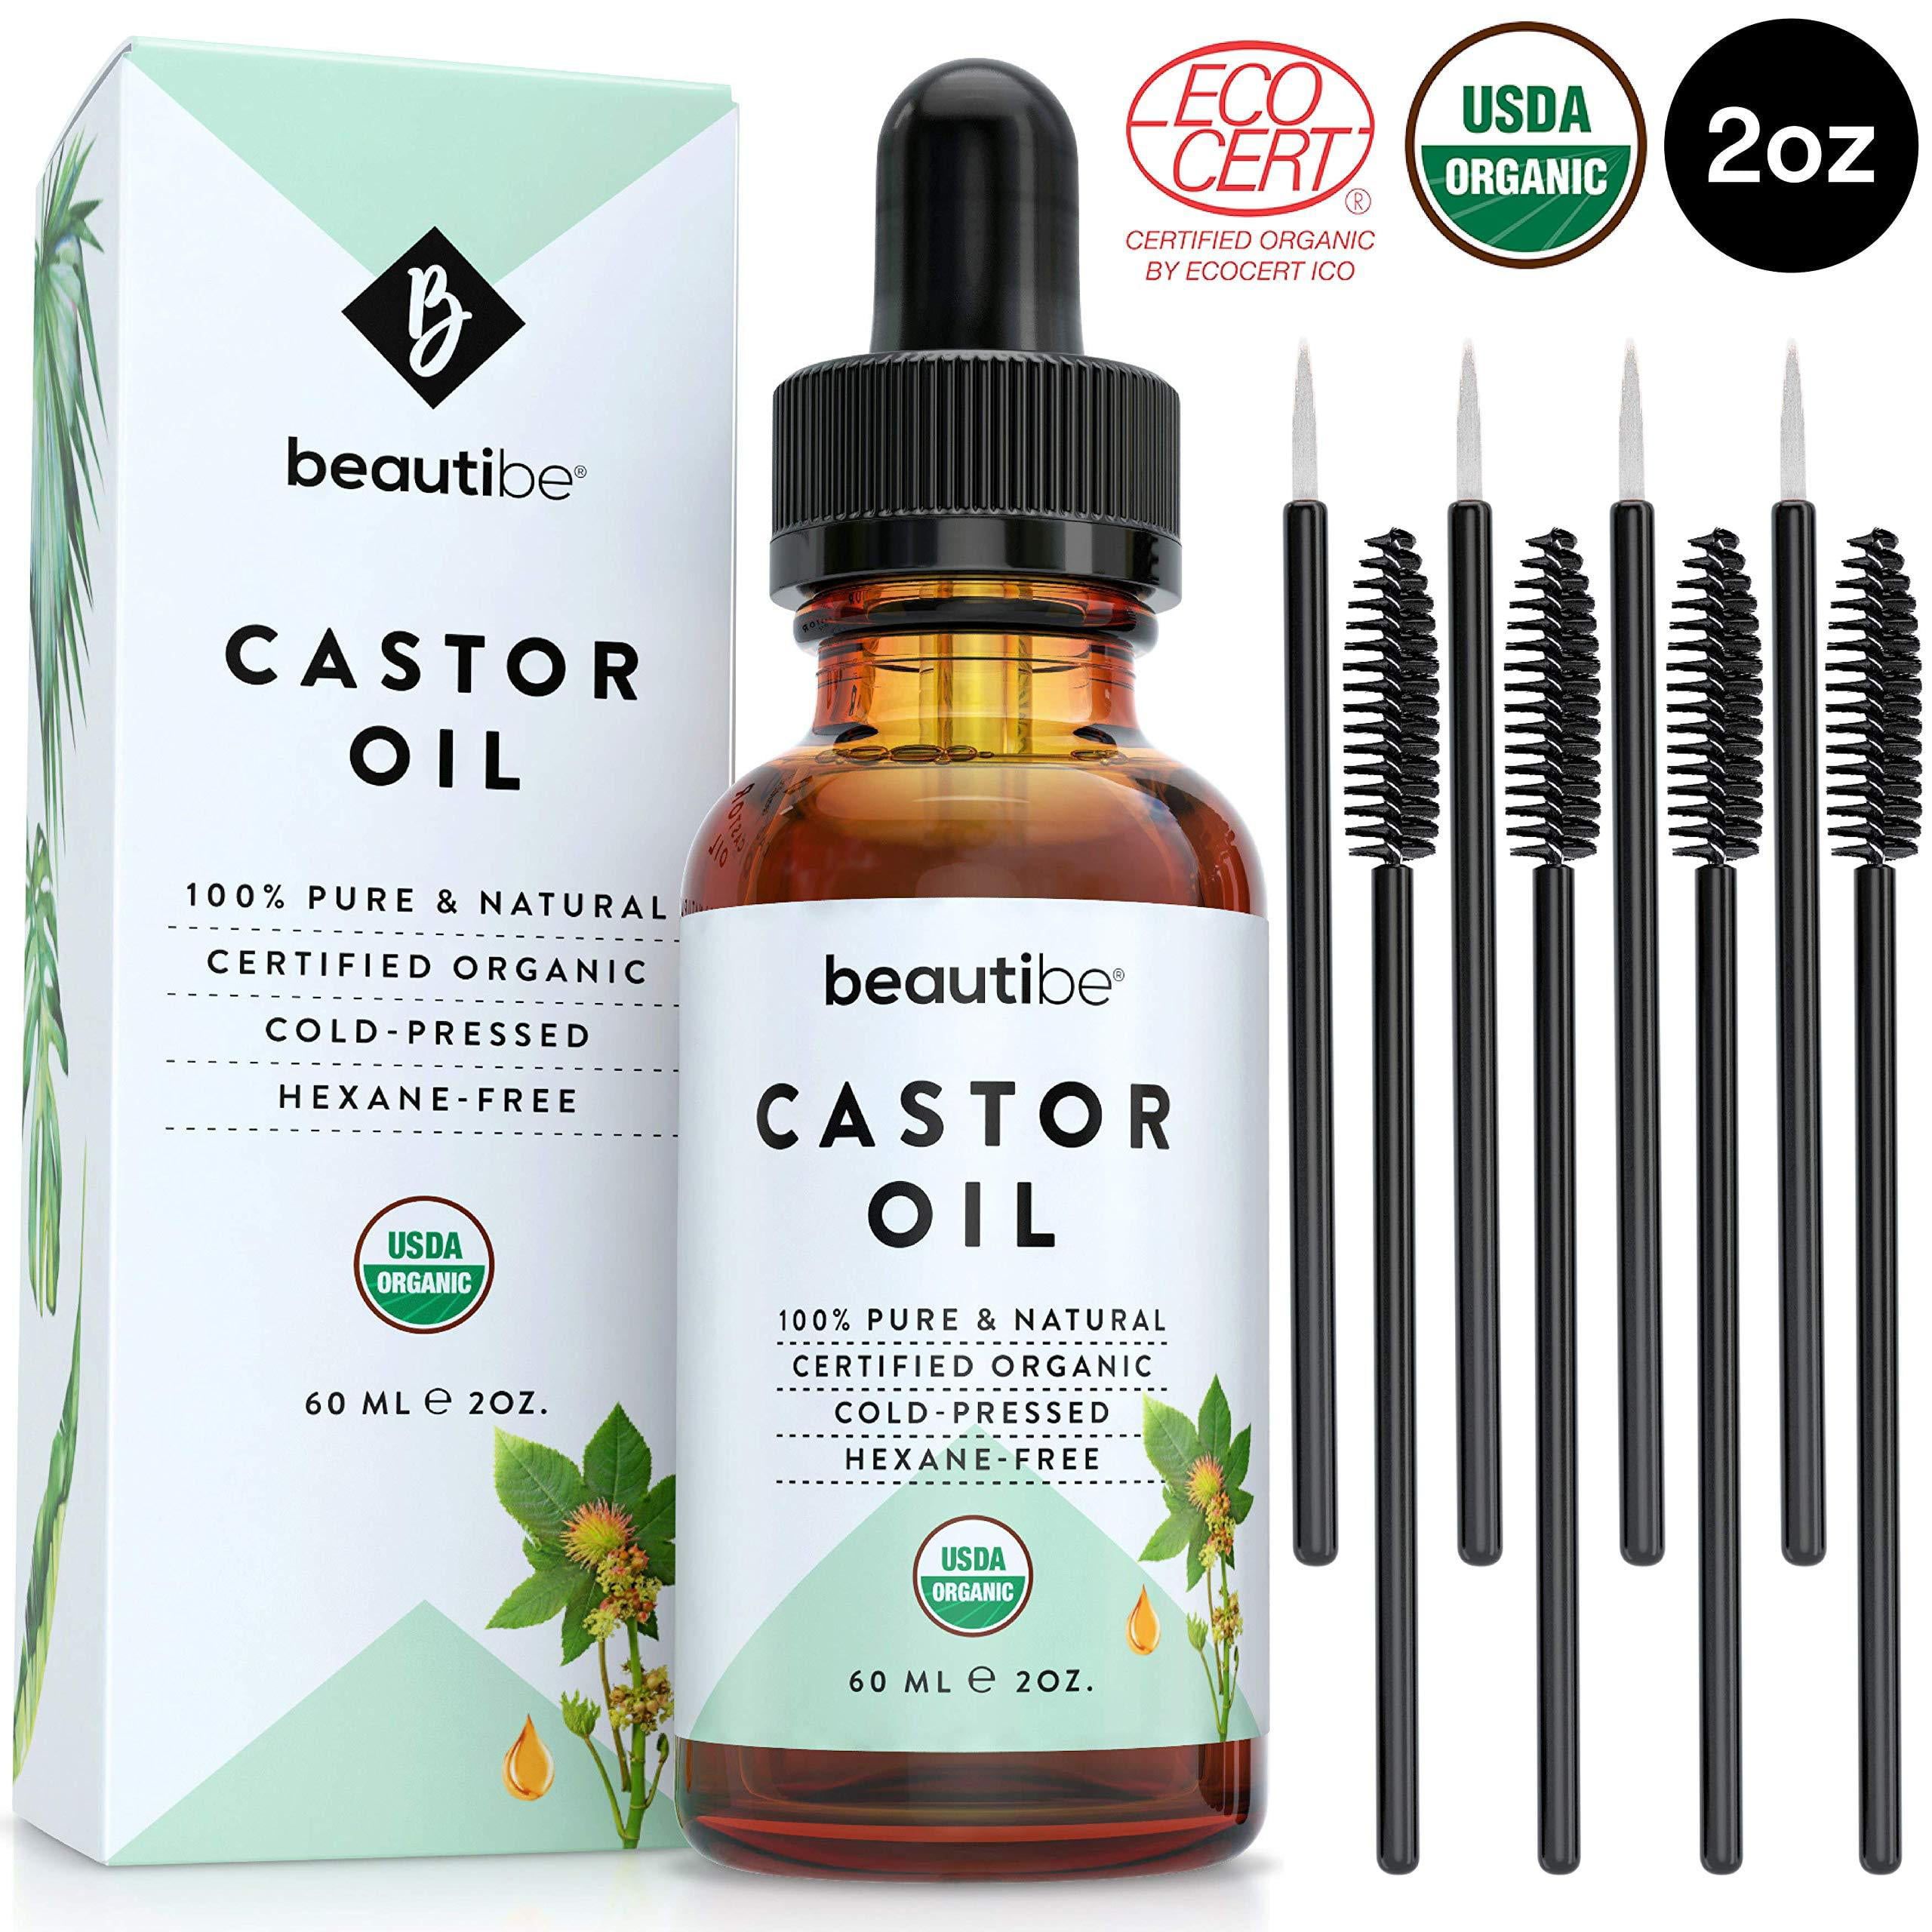 Organic Castor Oil for Hair, Lash and Brow Growth (2oz) - USDA Certified -  100% Pure, Cold-Pressed, Hexane-Free. Skin, Scalp & Nail Treatment.  Serum for Eyelashes & Eyebrows + Masc 